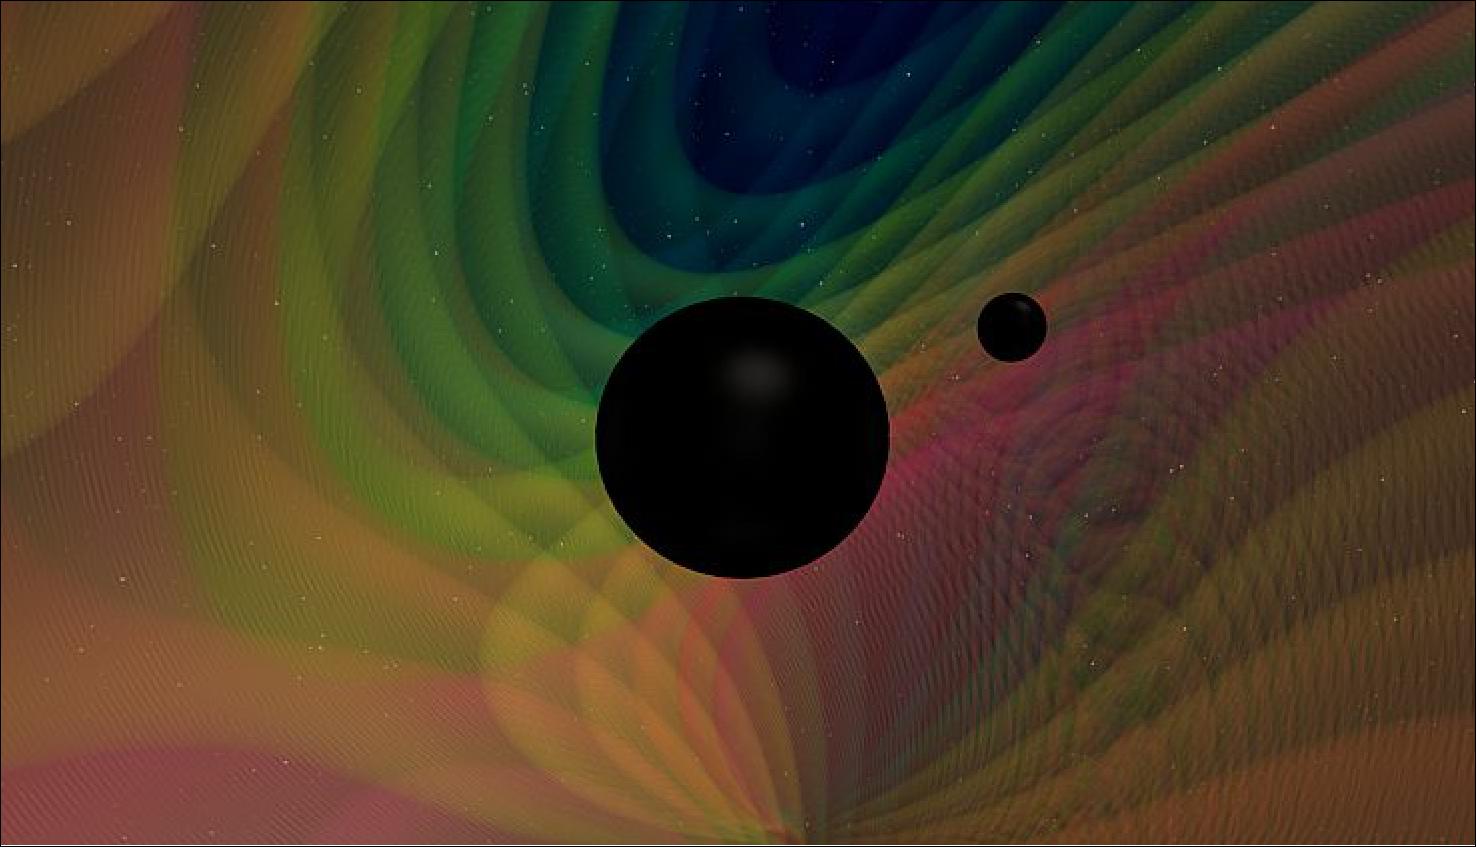 Figure 16: Binary black hole merger where the two black holes have distinctly different masses of about 8 and 30 times that of our Sun [image credit: N. Fischer, H. Pfeiffer, A. Buonanno (Max Planck Institute for Gravitational Physics), Simulating eXtreme Spacetimes project]